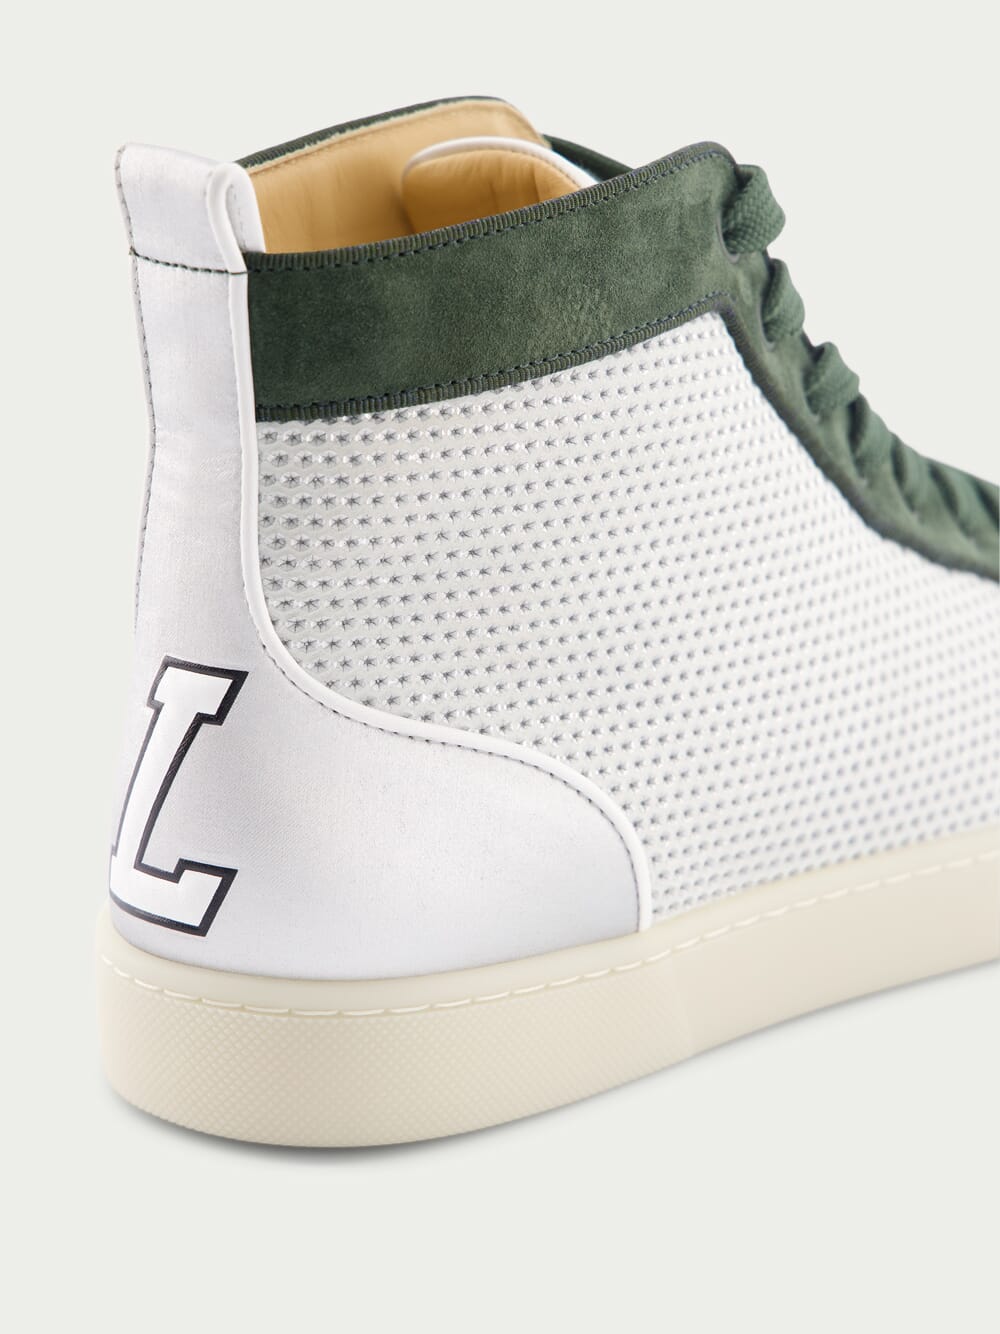 Christian LouboutinVarsilouis high-top leather sneakers at Fashion Clinic